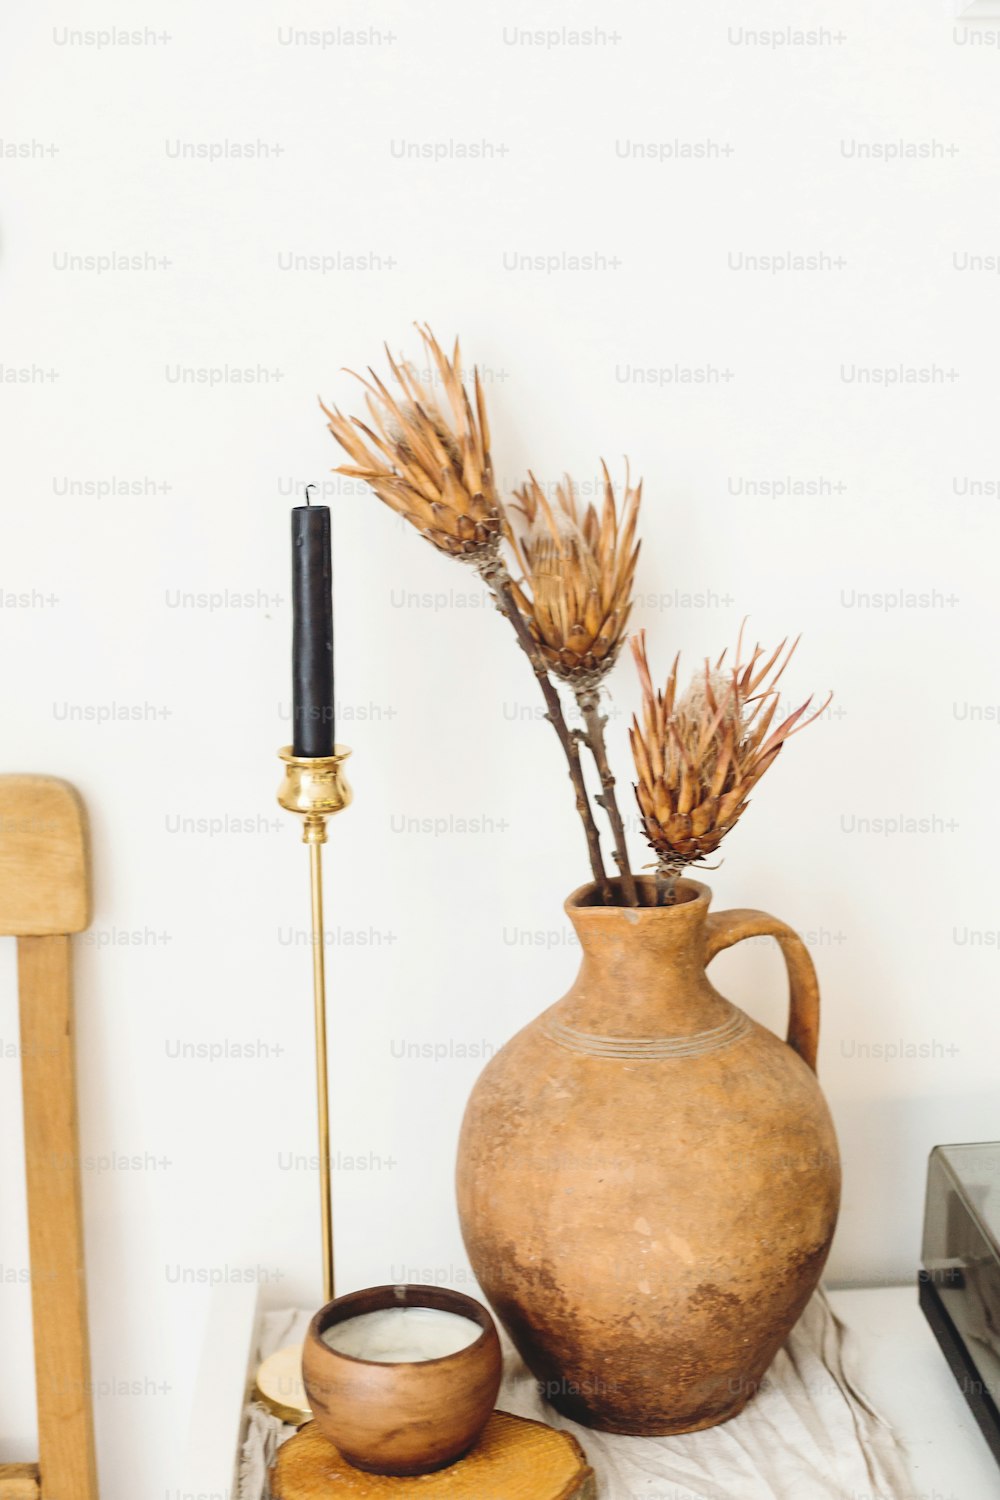 Dry protea flowers in old clay vase and candle on background of white wall in country home. Modern house decor. Stylish simple interior design elements. Rural house